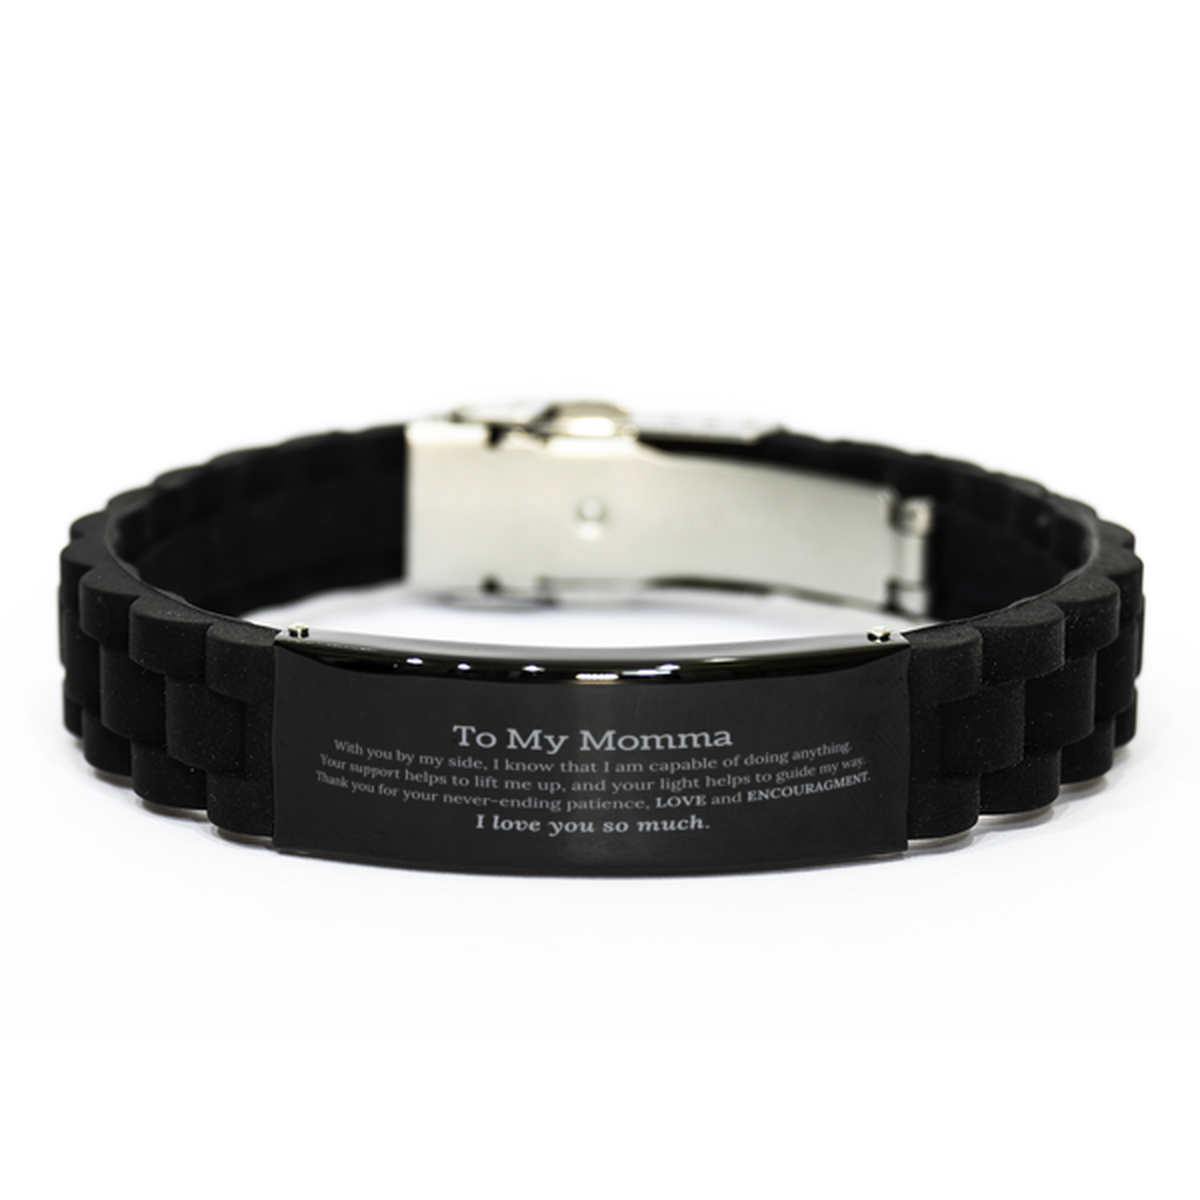 Appreciation Momma Black Glidelock Clasp Bracelet Gifts, To My Momma Birthday Christmas Wedding Keepsake Gifts for Momma With you by my side, I know that I am capable of doing anything. I love you so much